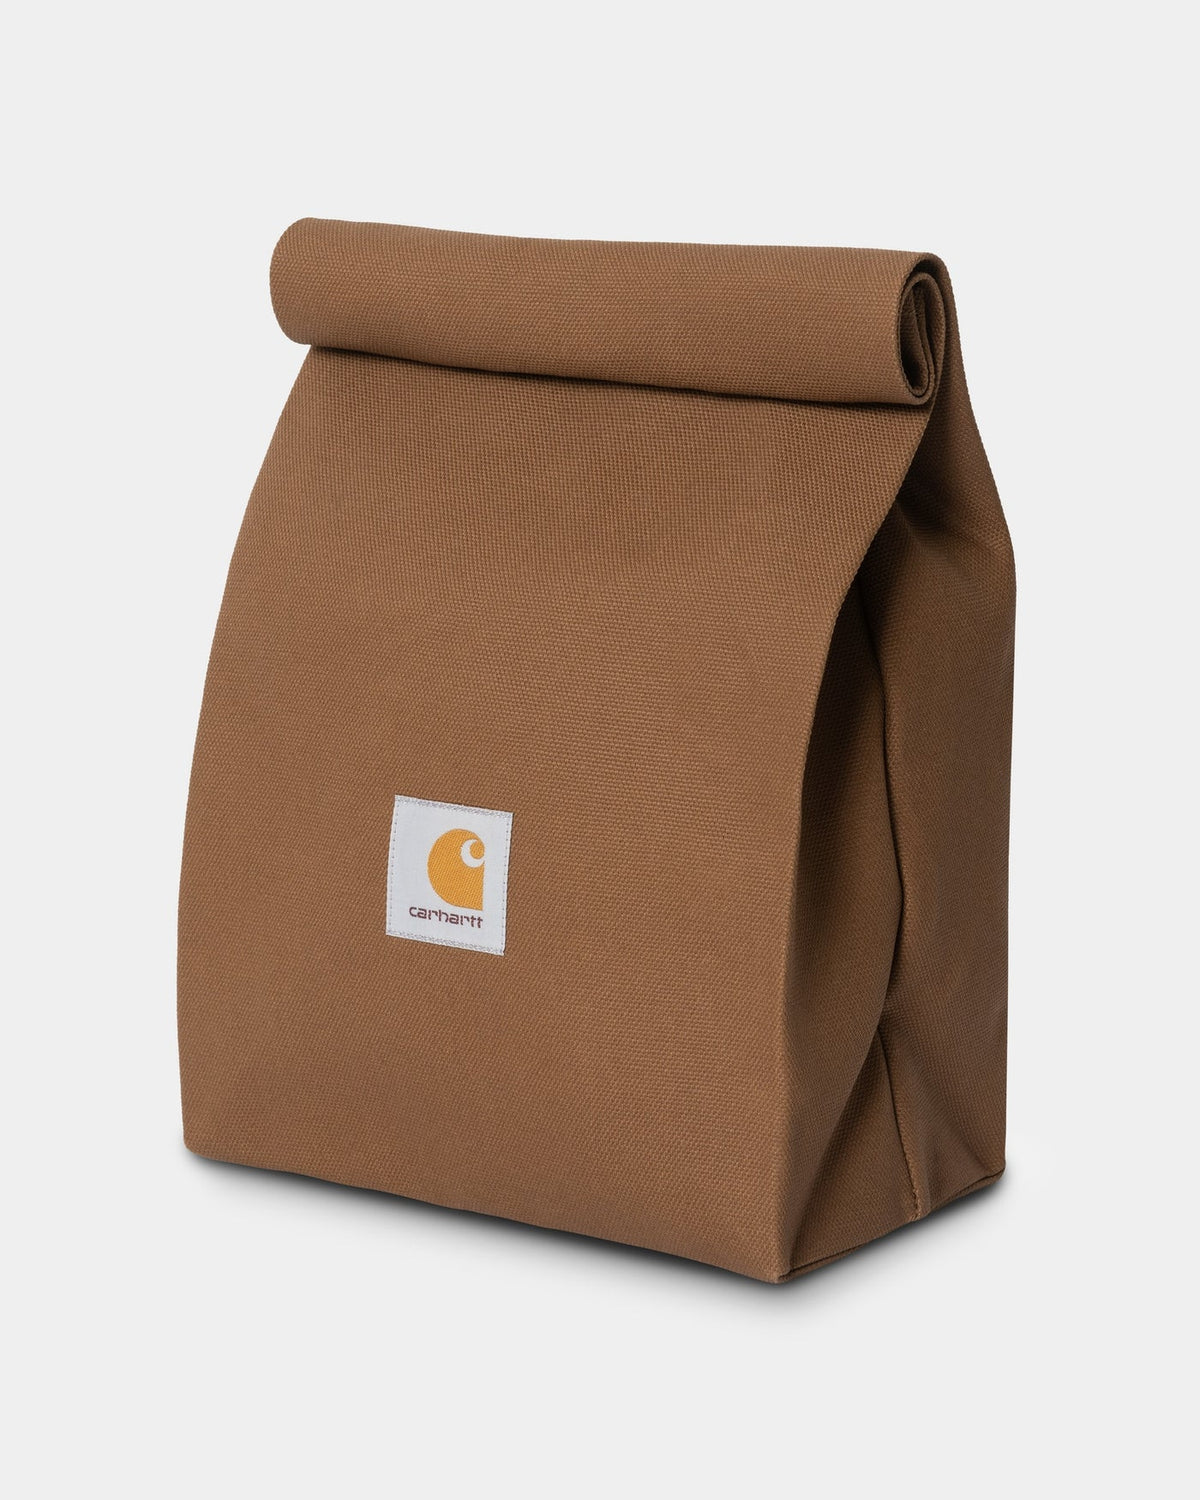 Lunch Bag in Hamilton Brown